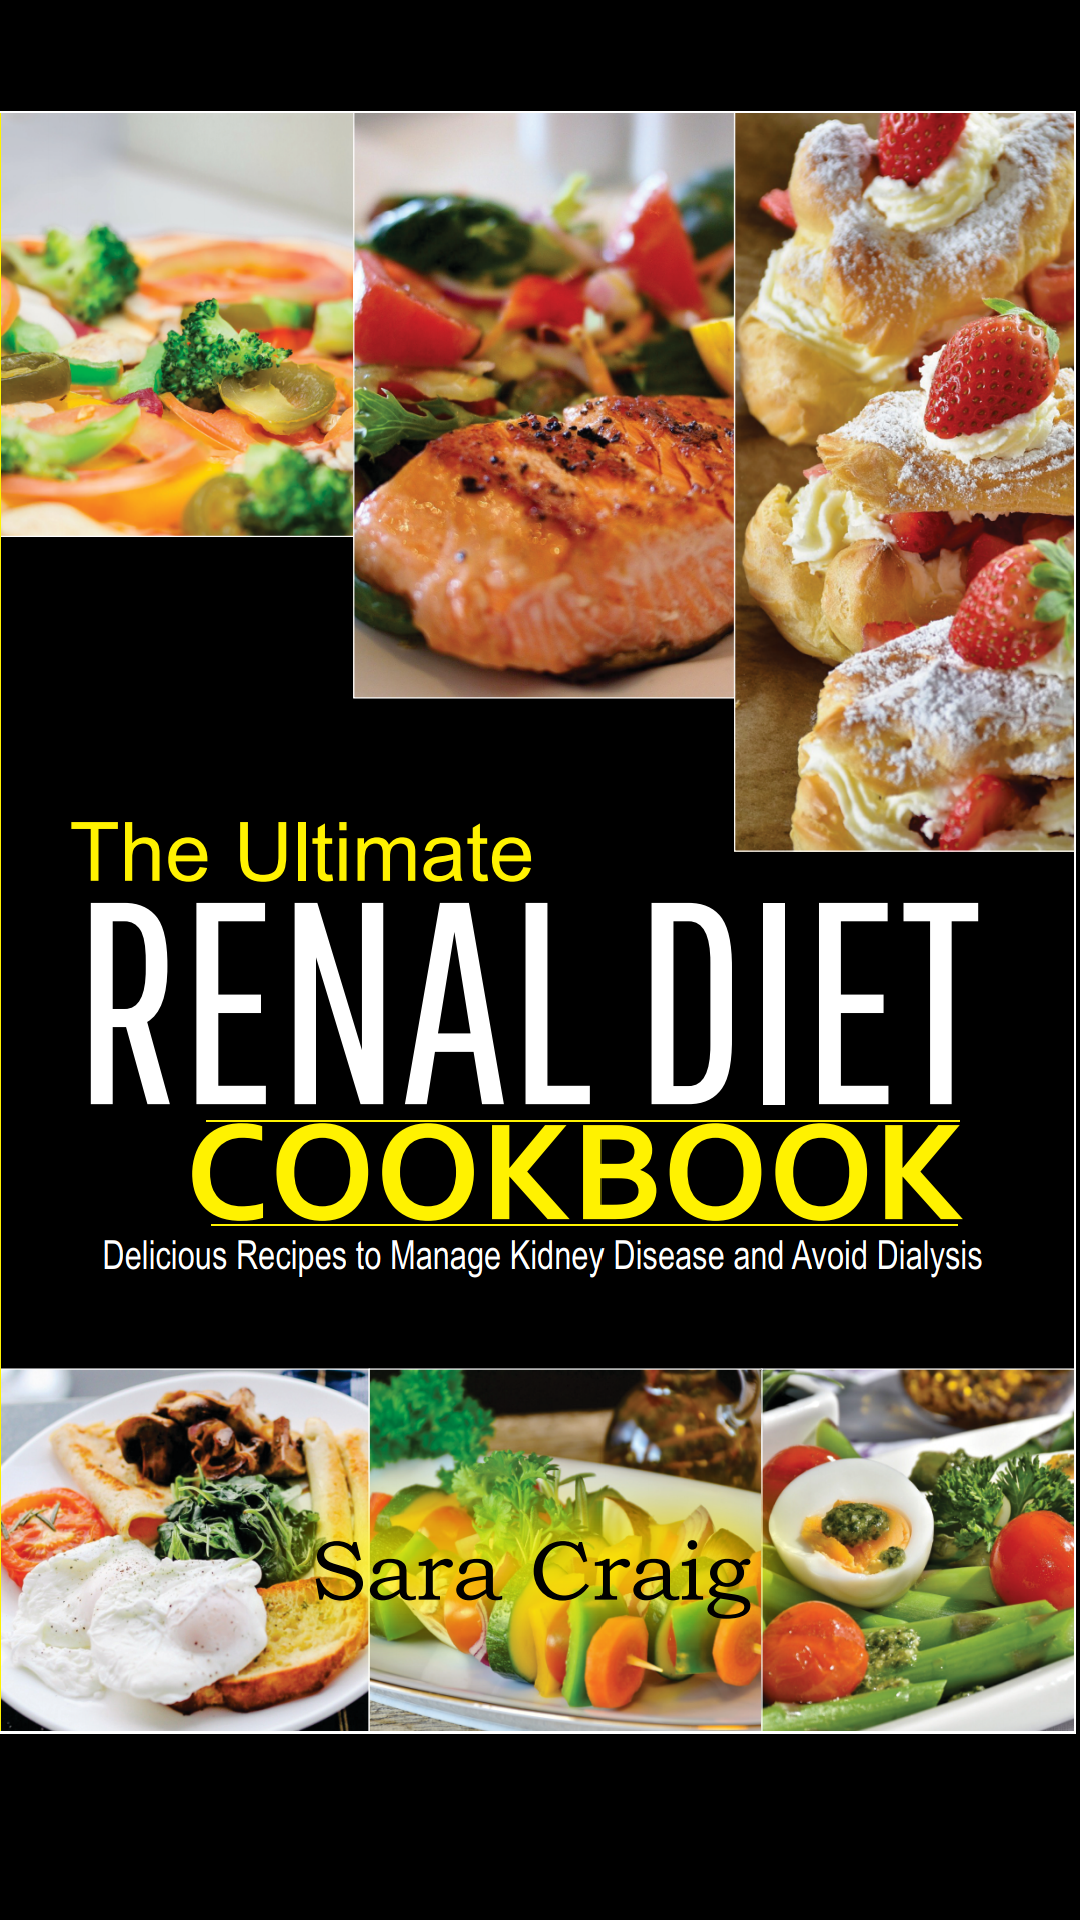 FREE: The Ultimate Renal Diet Cookbook: Delicious Recipes To Manage Kidney Disease And Avoid Dialysis by Sara Craig